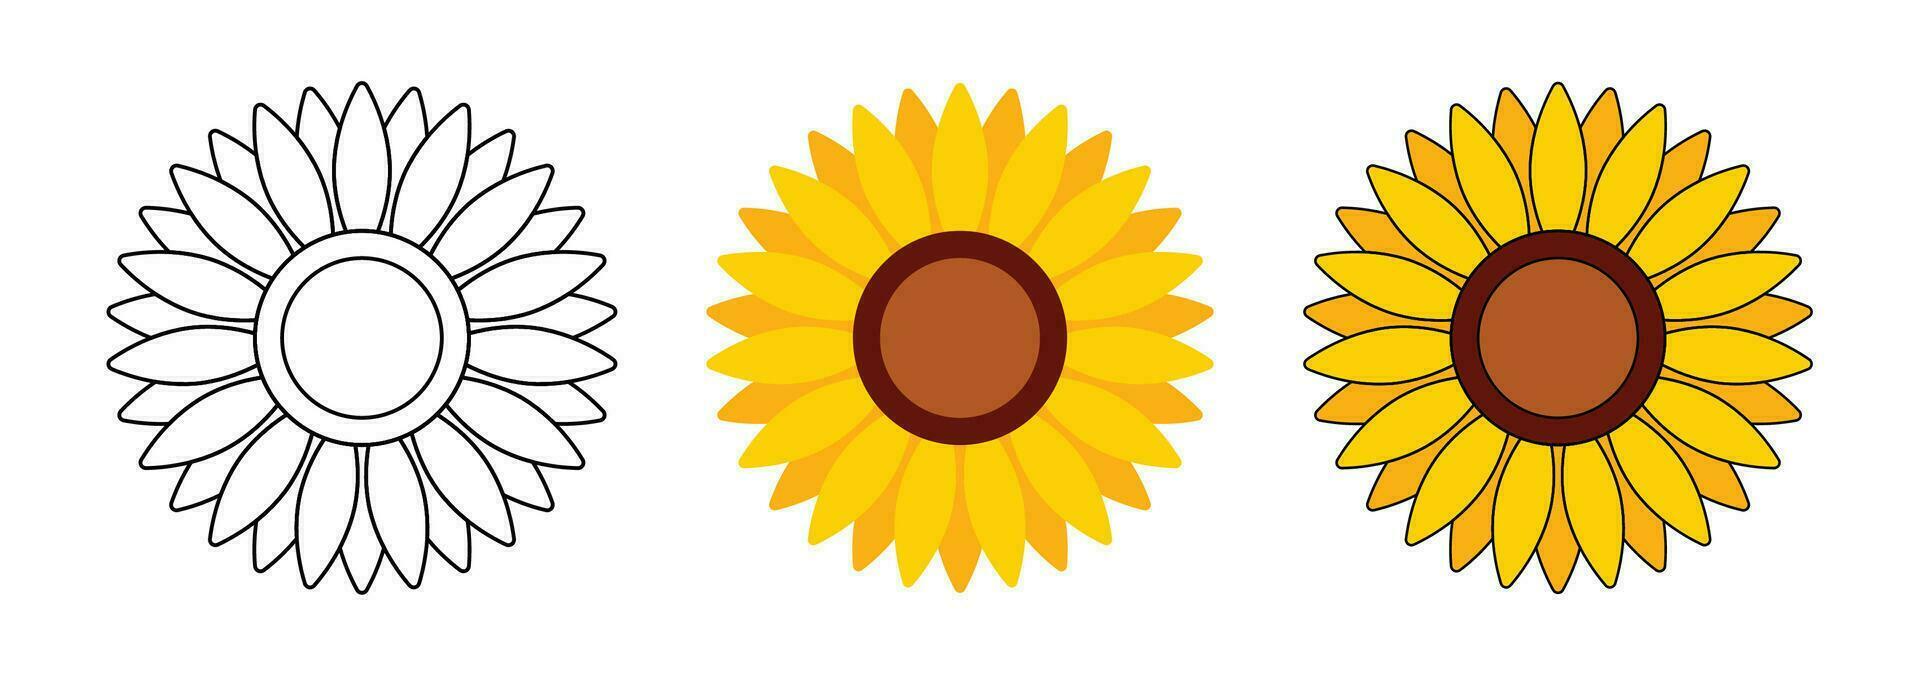 Sunflower head illustration for greeting card decorative and design. vector